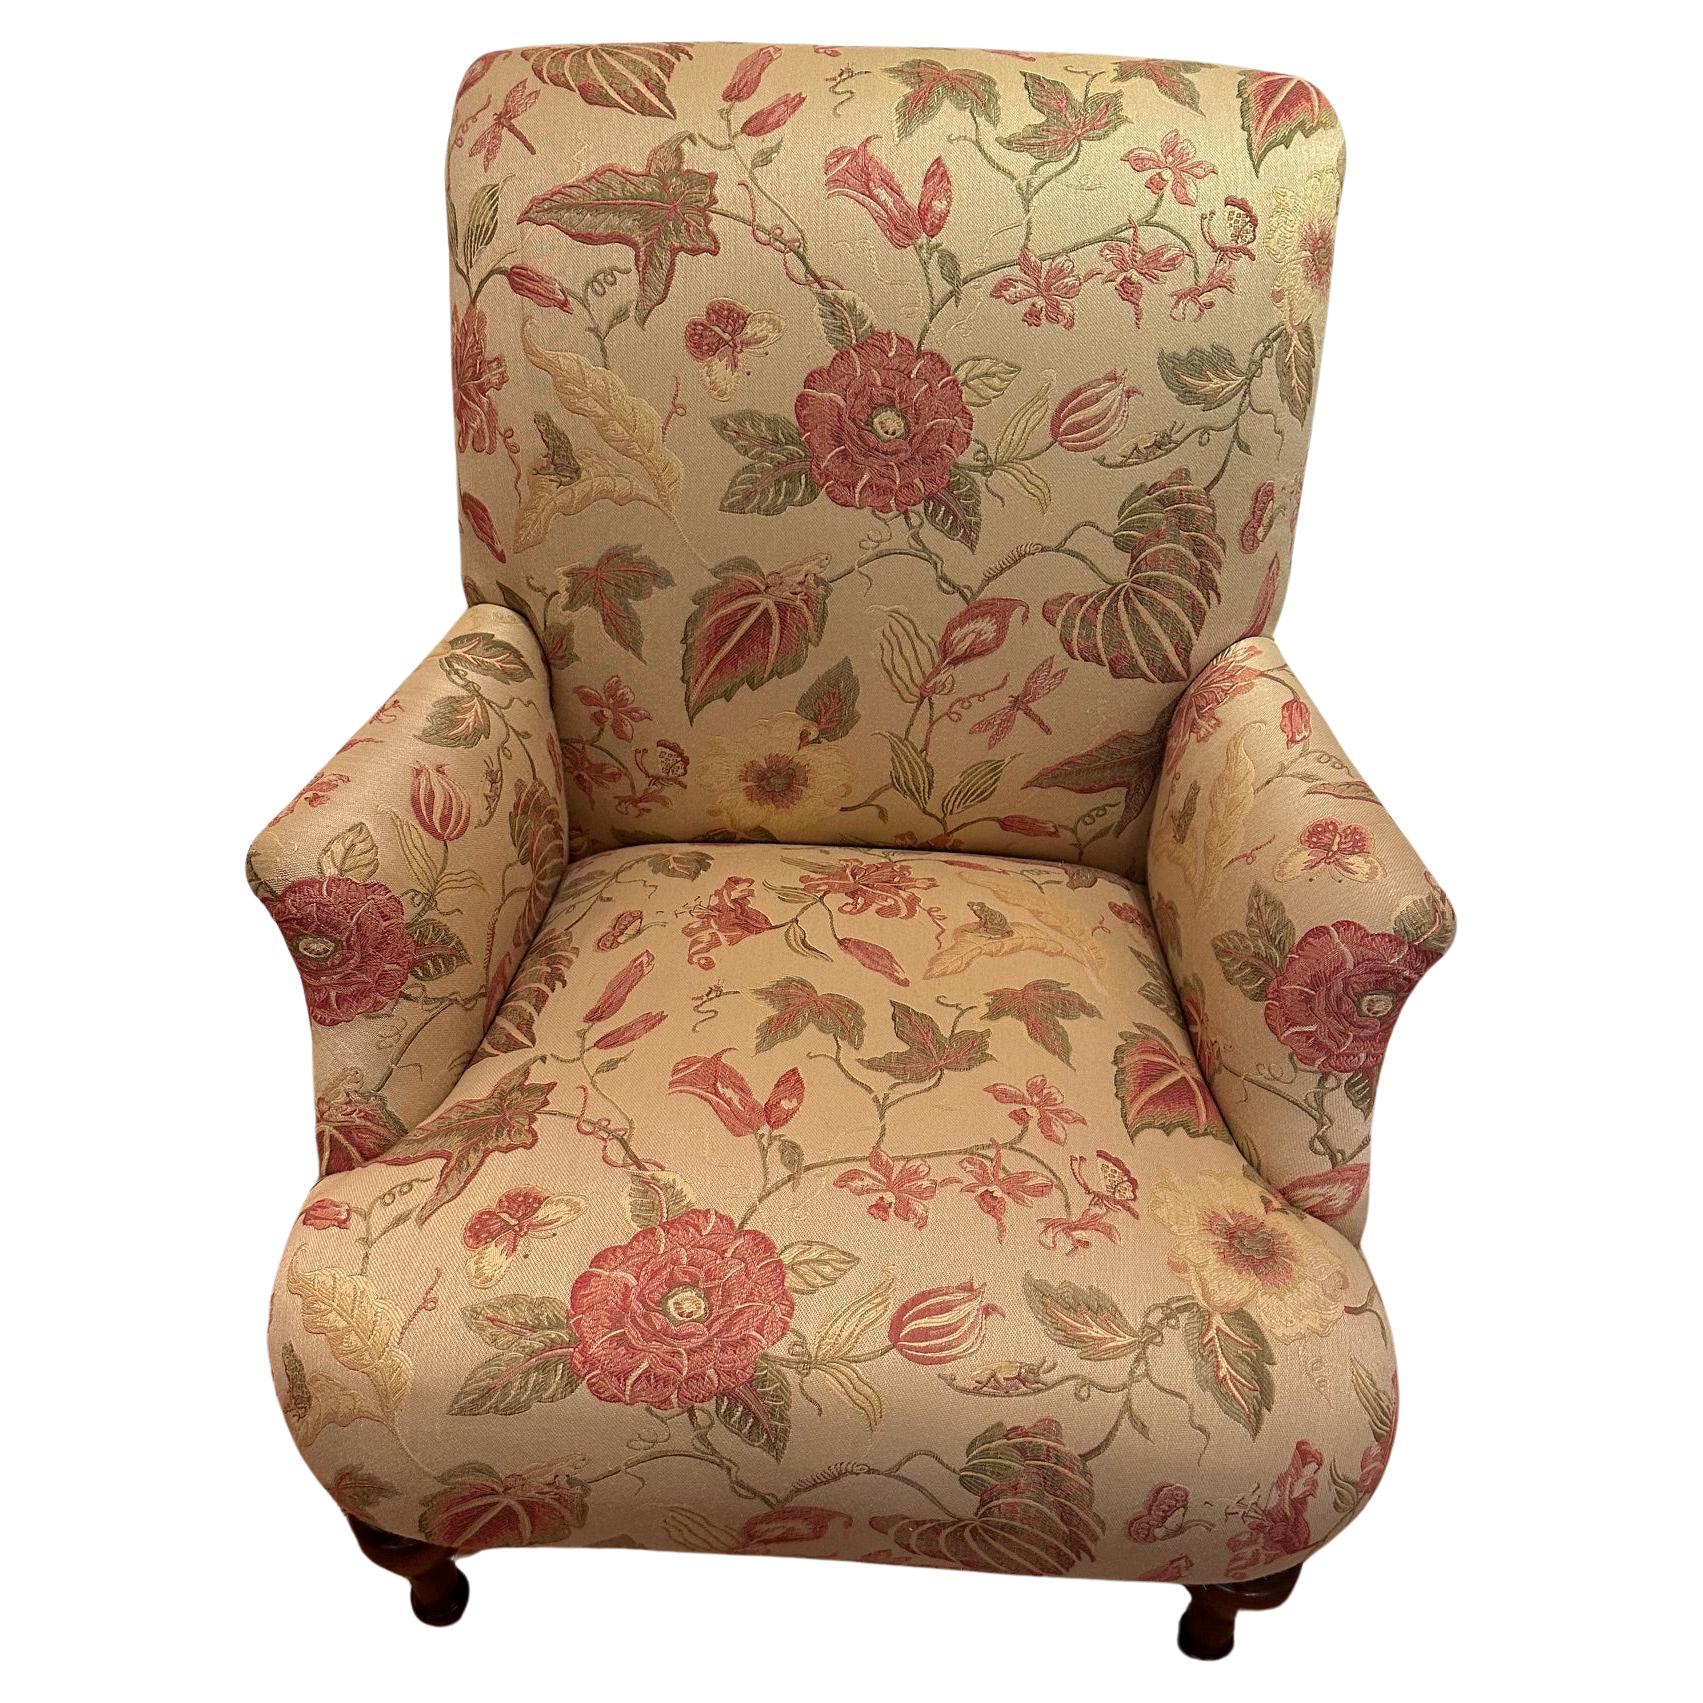 Classic English Style Woven Floral Club Chair For Sale